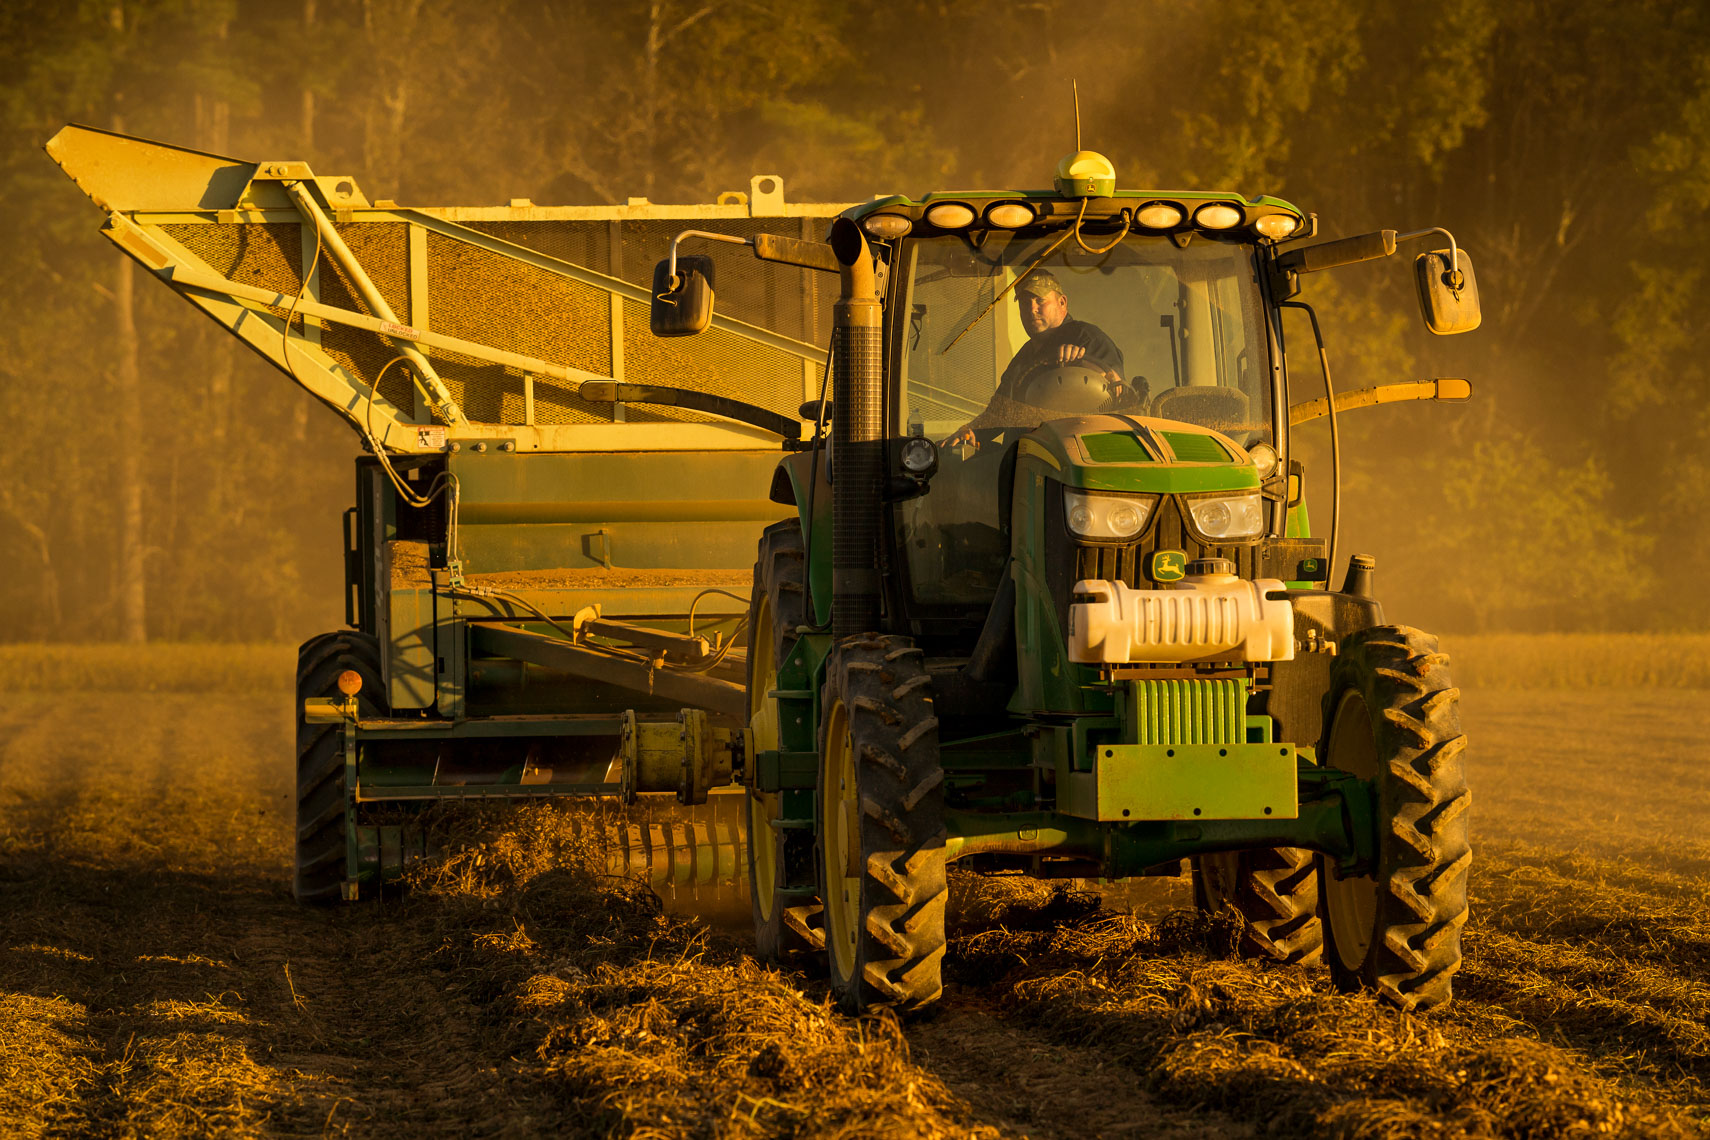 Peanut_Farming_for_Fleming_Brothers_Farms_20201014_by_Justin_Kase_Conder_0094-Edit_Retouched